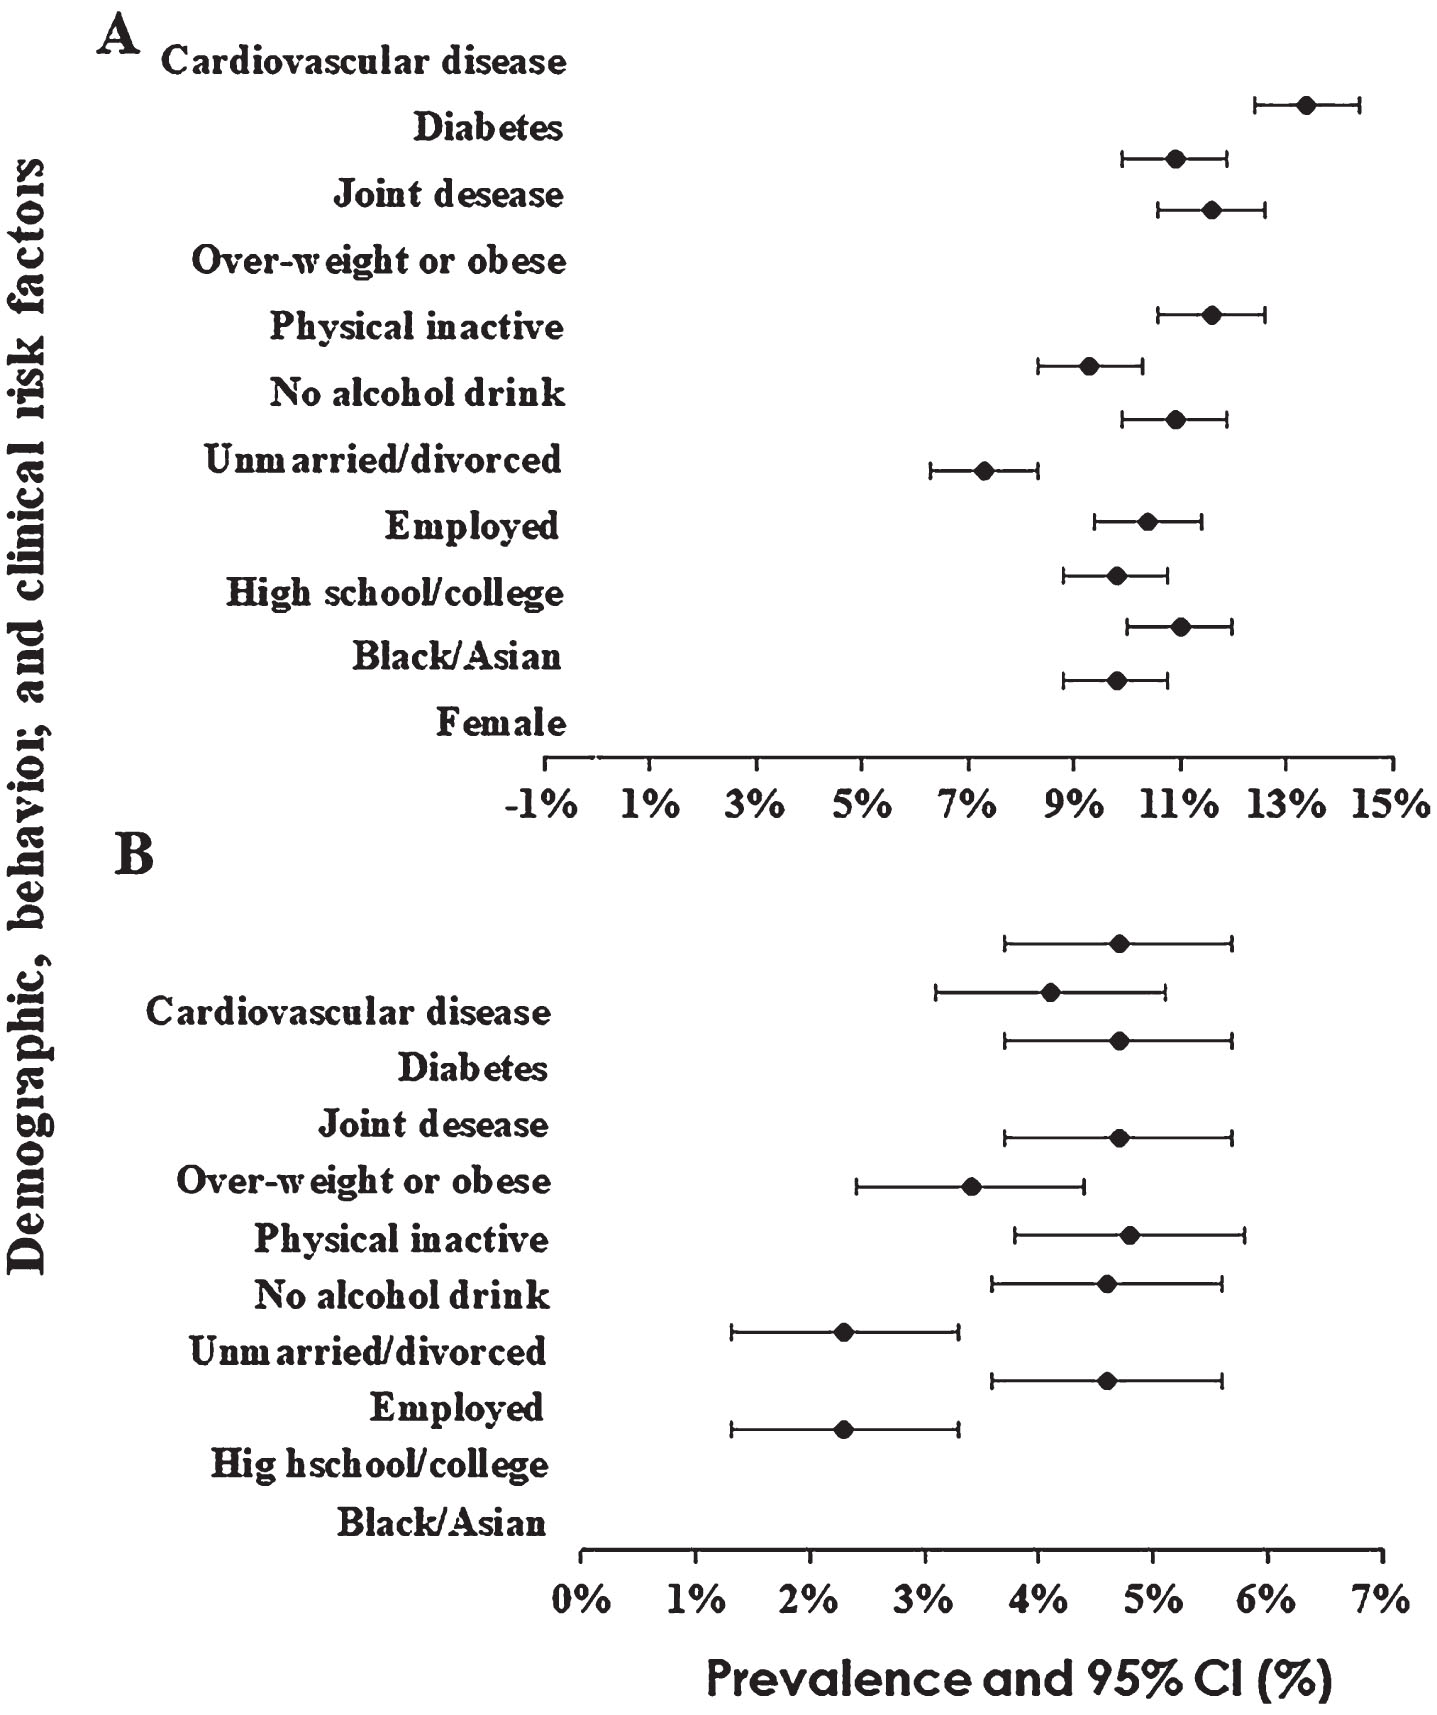 Prevalence of asthma among adults who smoked according to grew up living with A) a father or mother who smoked; B) a workplace who smoked. A dark dot circle represents prevalence, and bars show a 95% confidence interval.